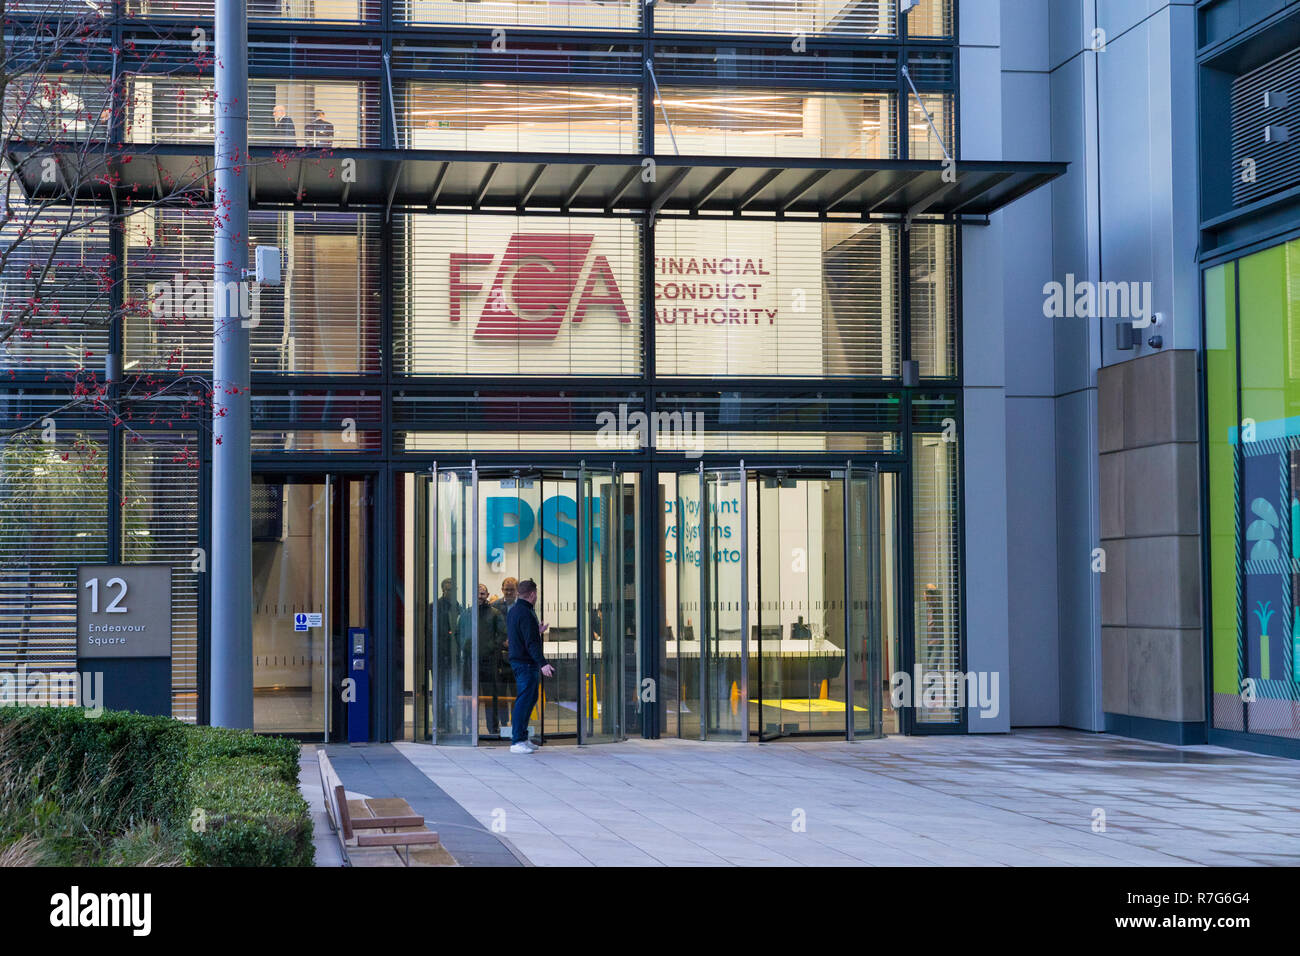 fca, financial conduct authority office building, payment systems regulator, endeavour square, stratford, london, uk Stock Photo